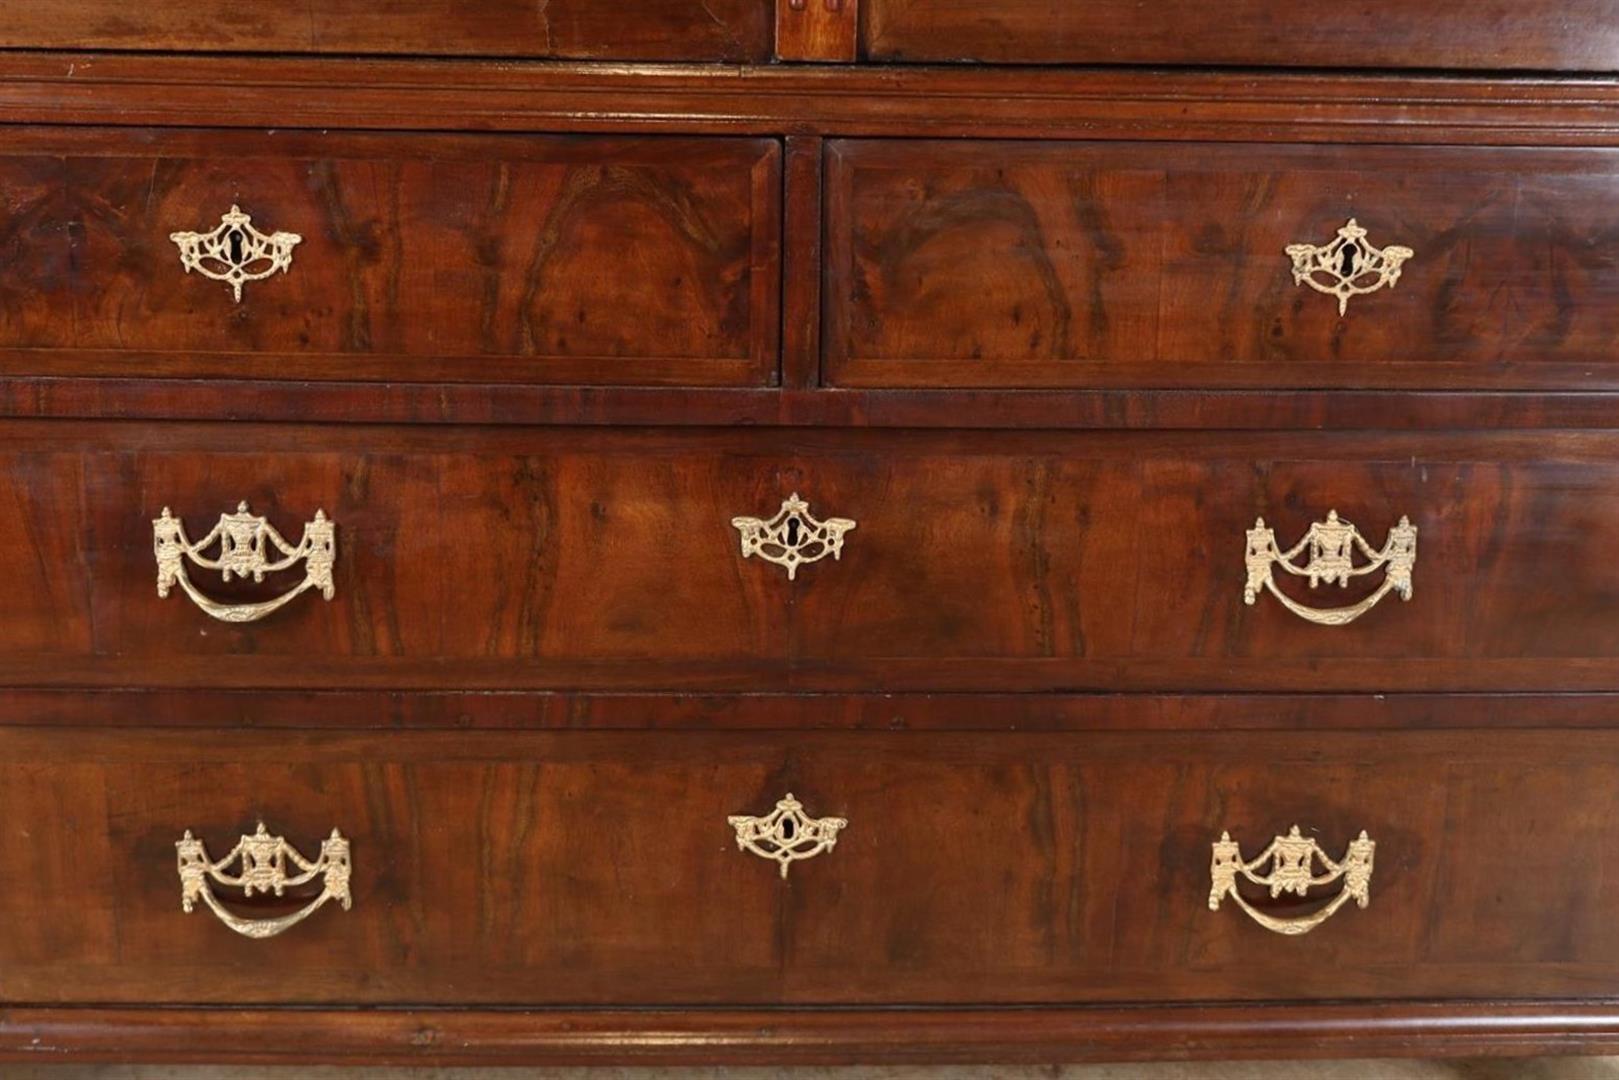 Mahogany Louis XVI cabinet, 2 panel doors with carved garlands and 4 drawers with bronze fittings, - Image 6 of 7